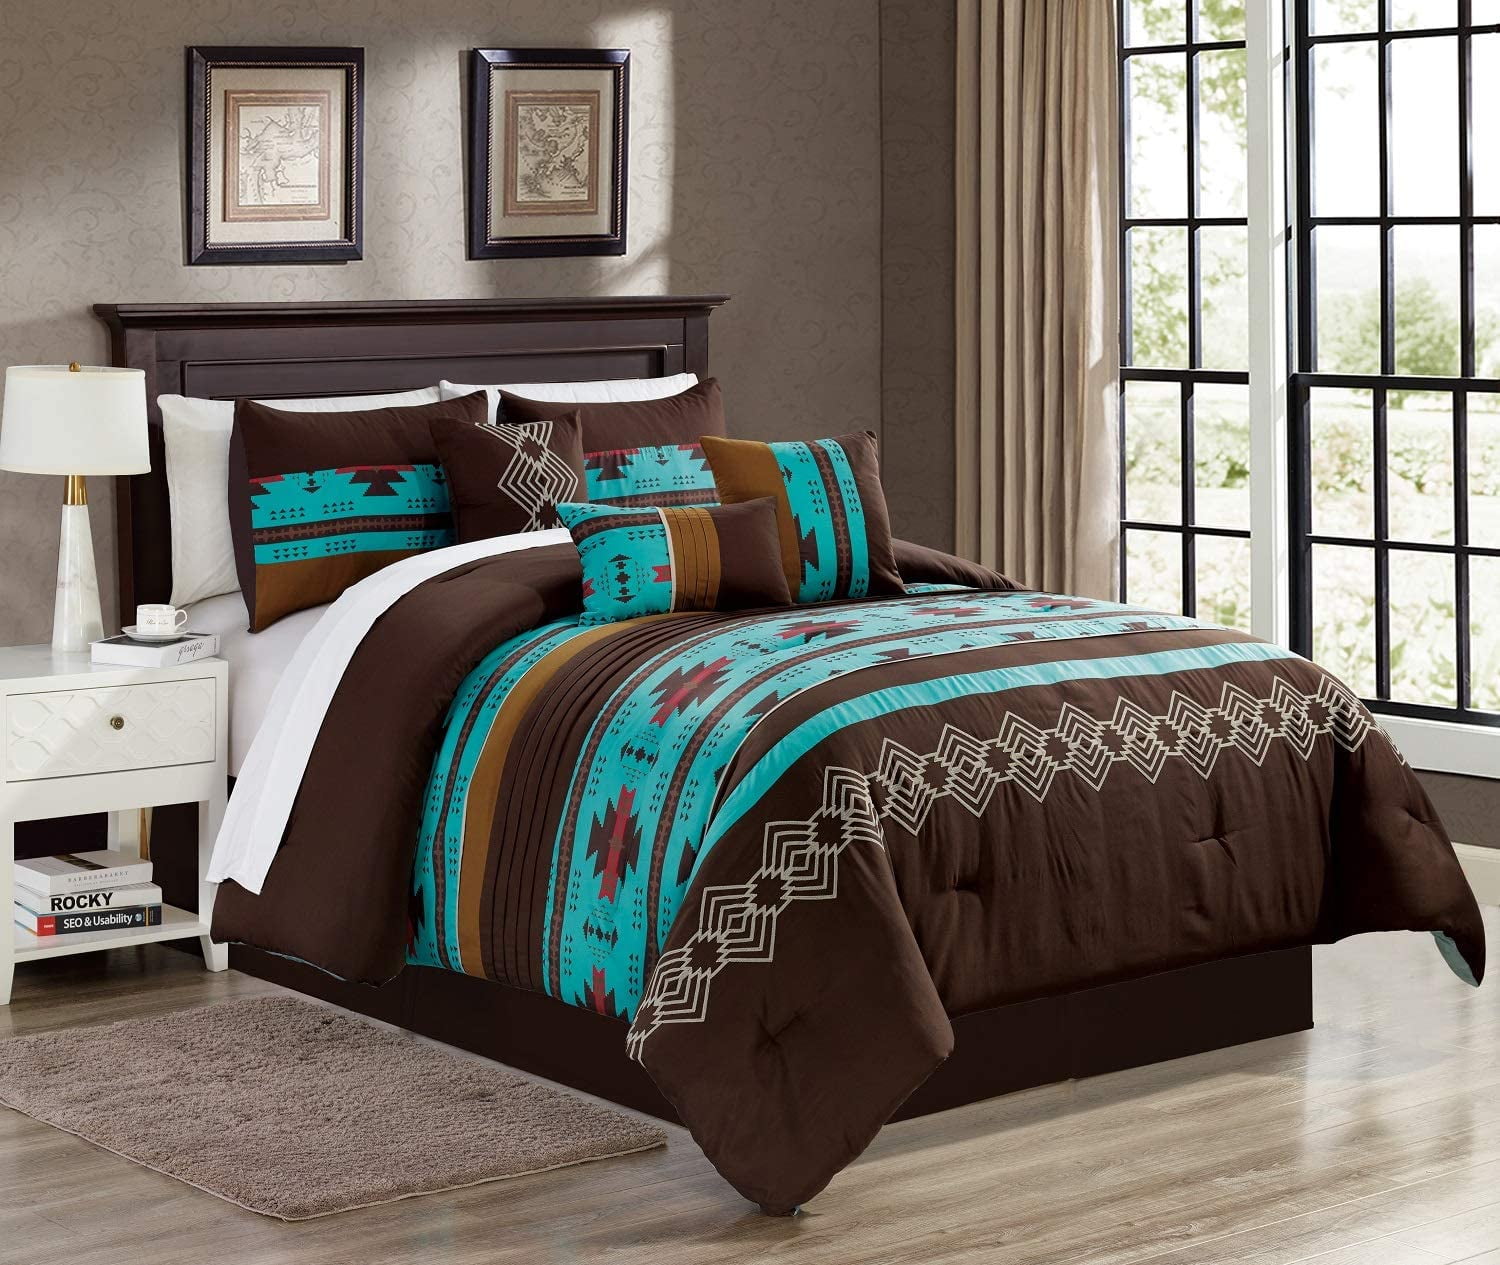 Details about   NEW ~ ULTRA SOFT COZY BROWN BEIGE TAUPE TAN LODGE WARM RED LEAF COMFORTER SET 